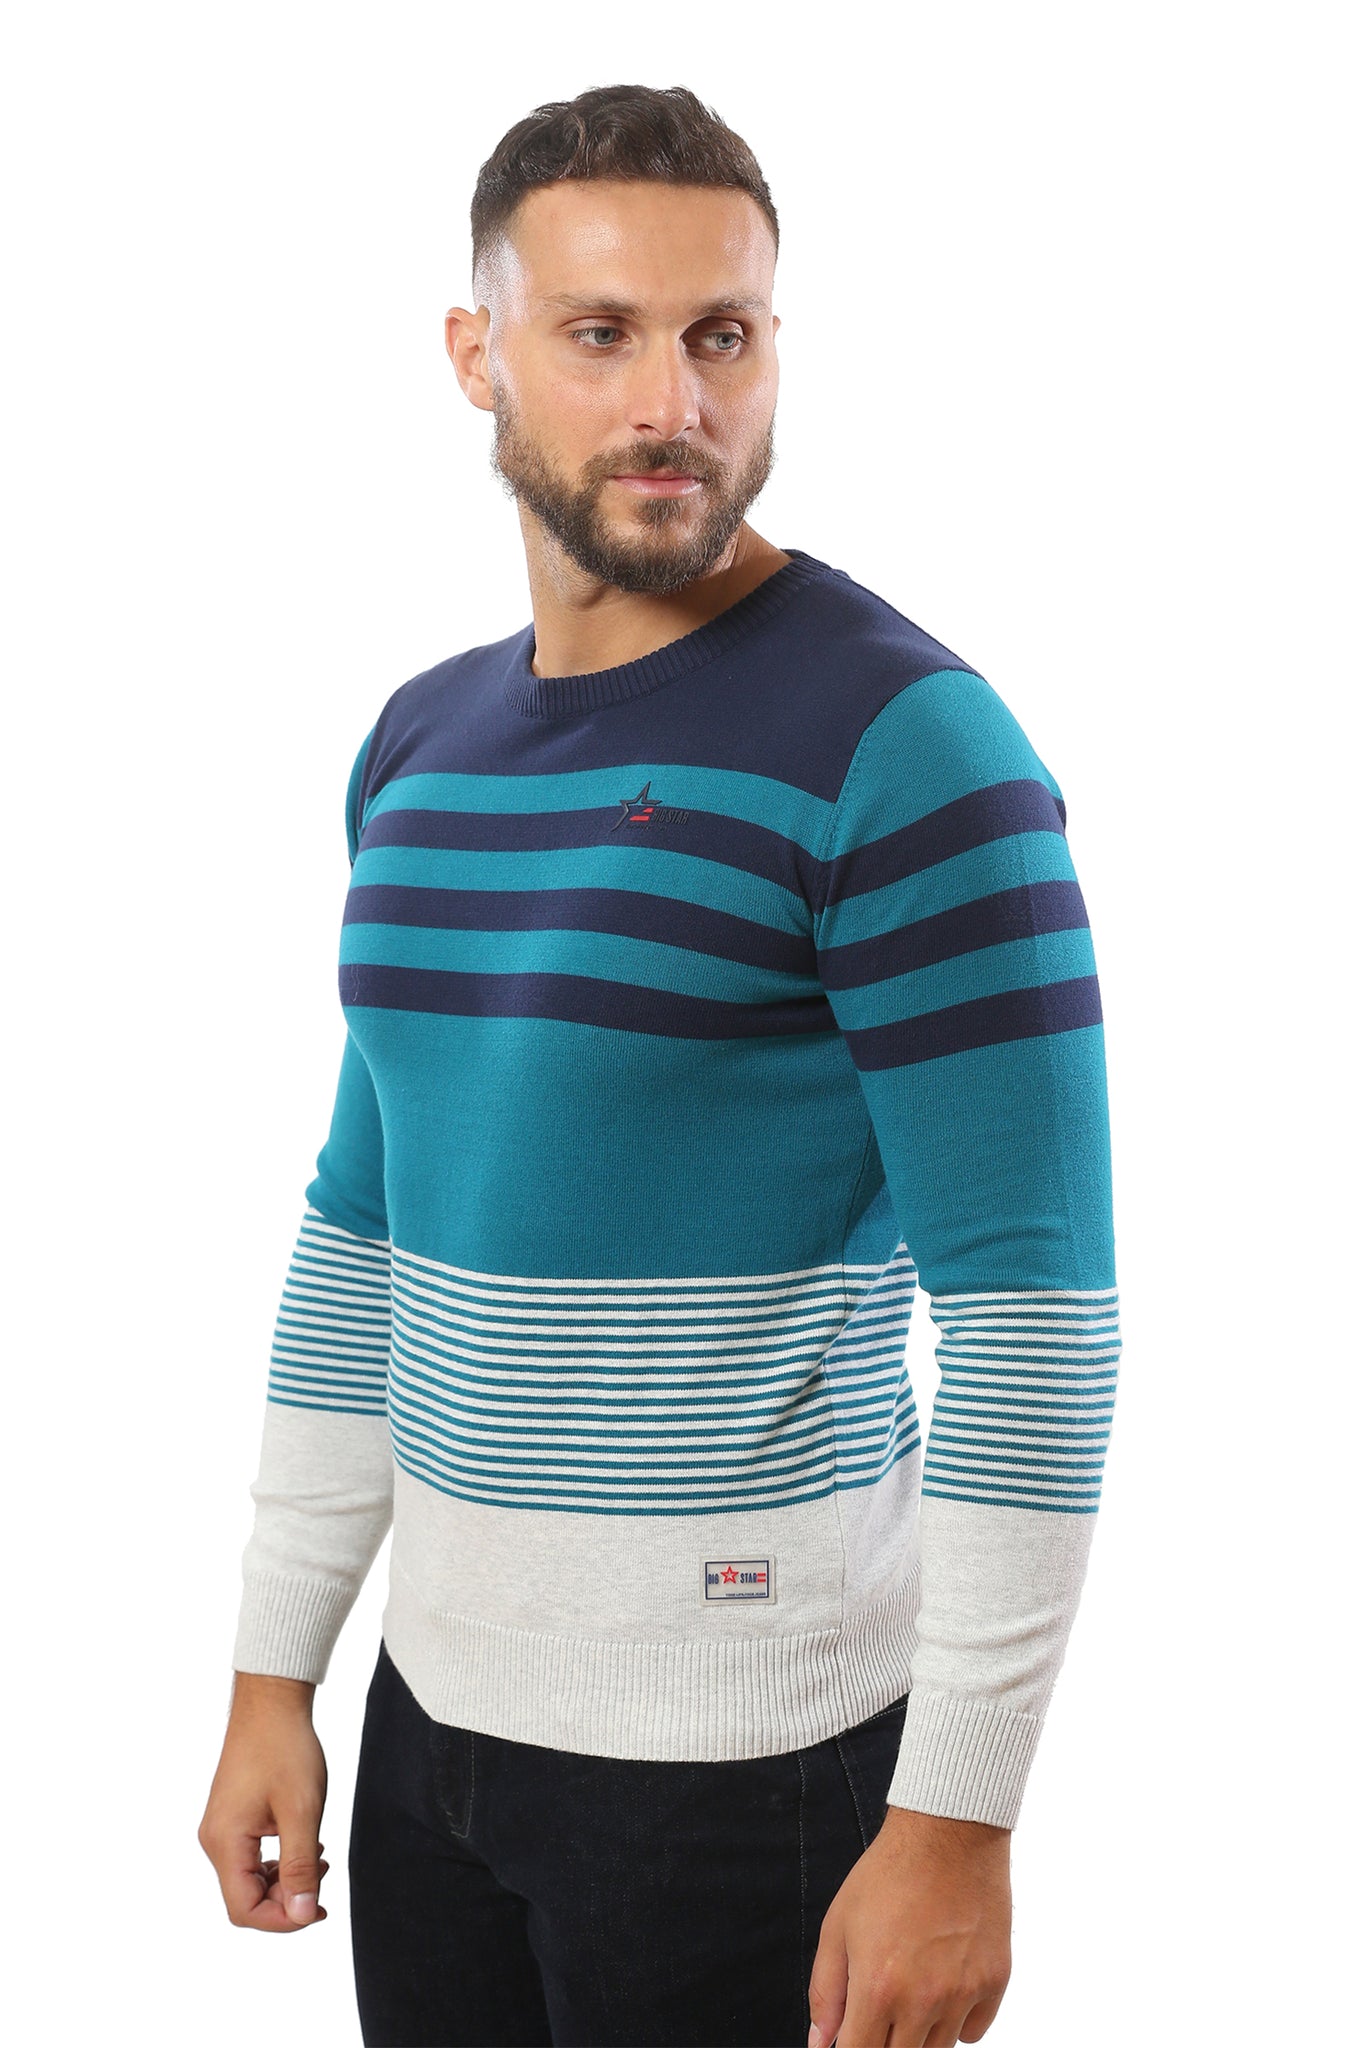 Sweater with Stripes | Blue Sapphire with Navy and Heather Grey